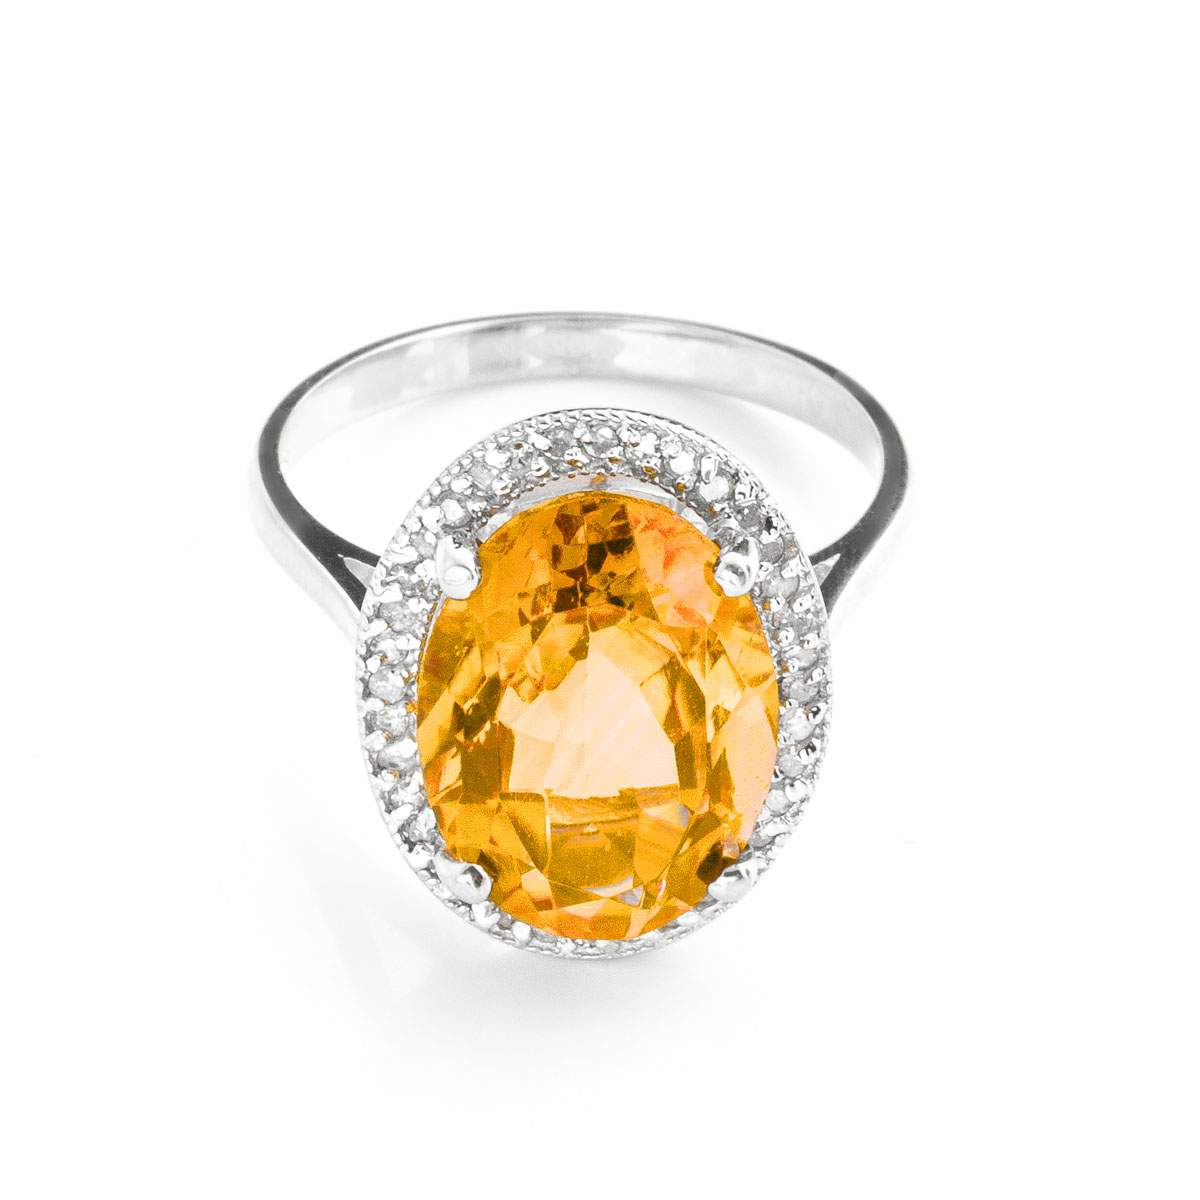 Citrine Halo Ring 5.28 ctw in 9ct White Gold